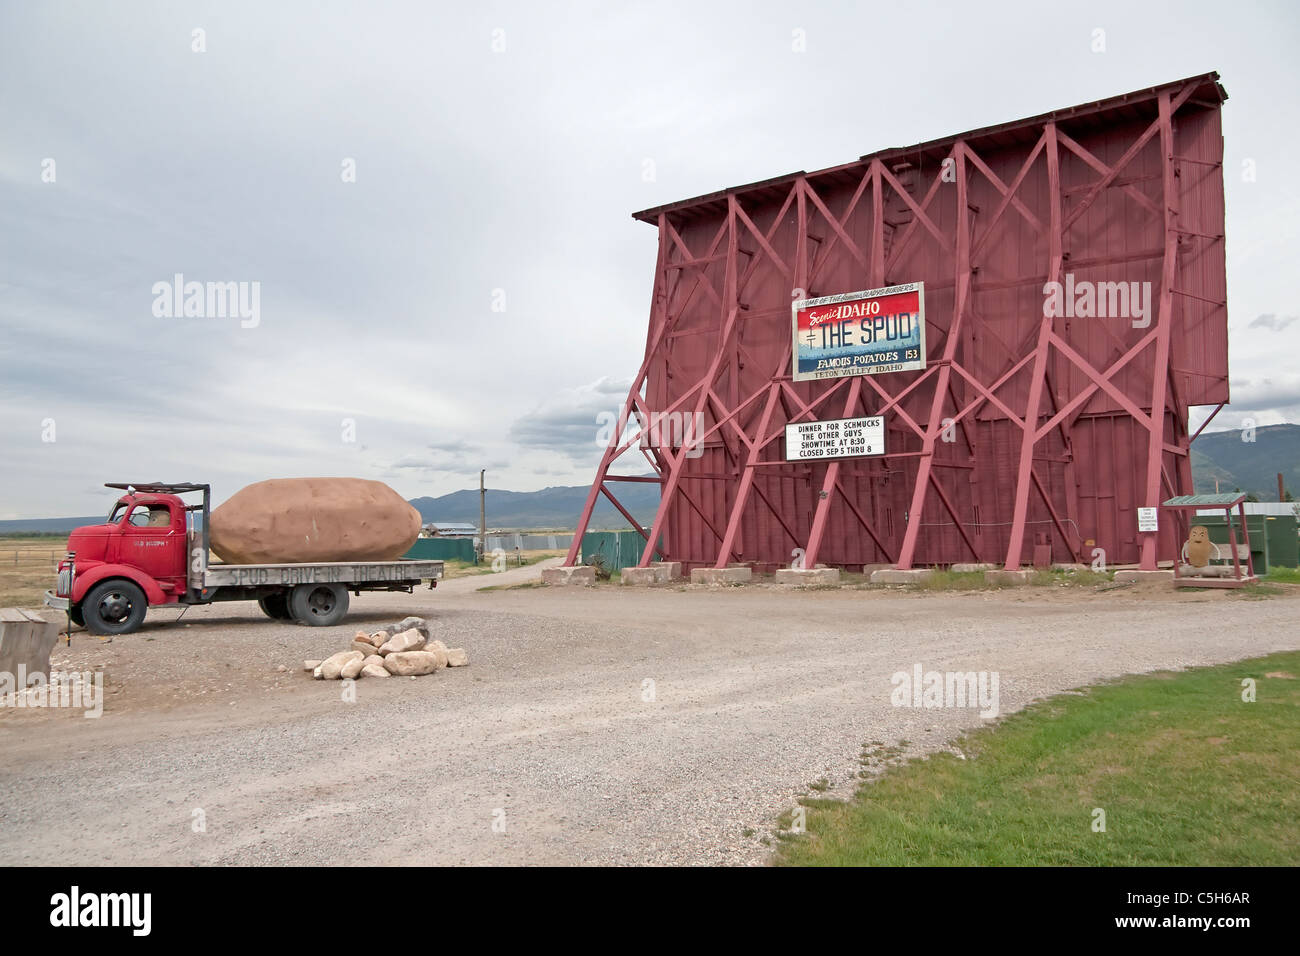 Came upon this unique drive-in theater in Driggs, Idaho, USA, utilizing the states fame for great 'spud' potatoes. Stock Photo